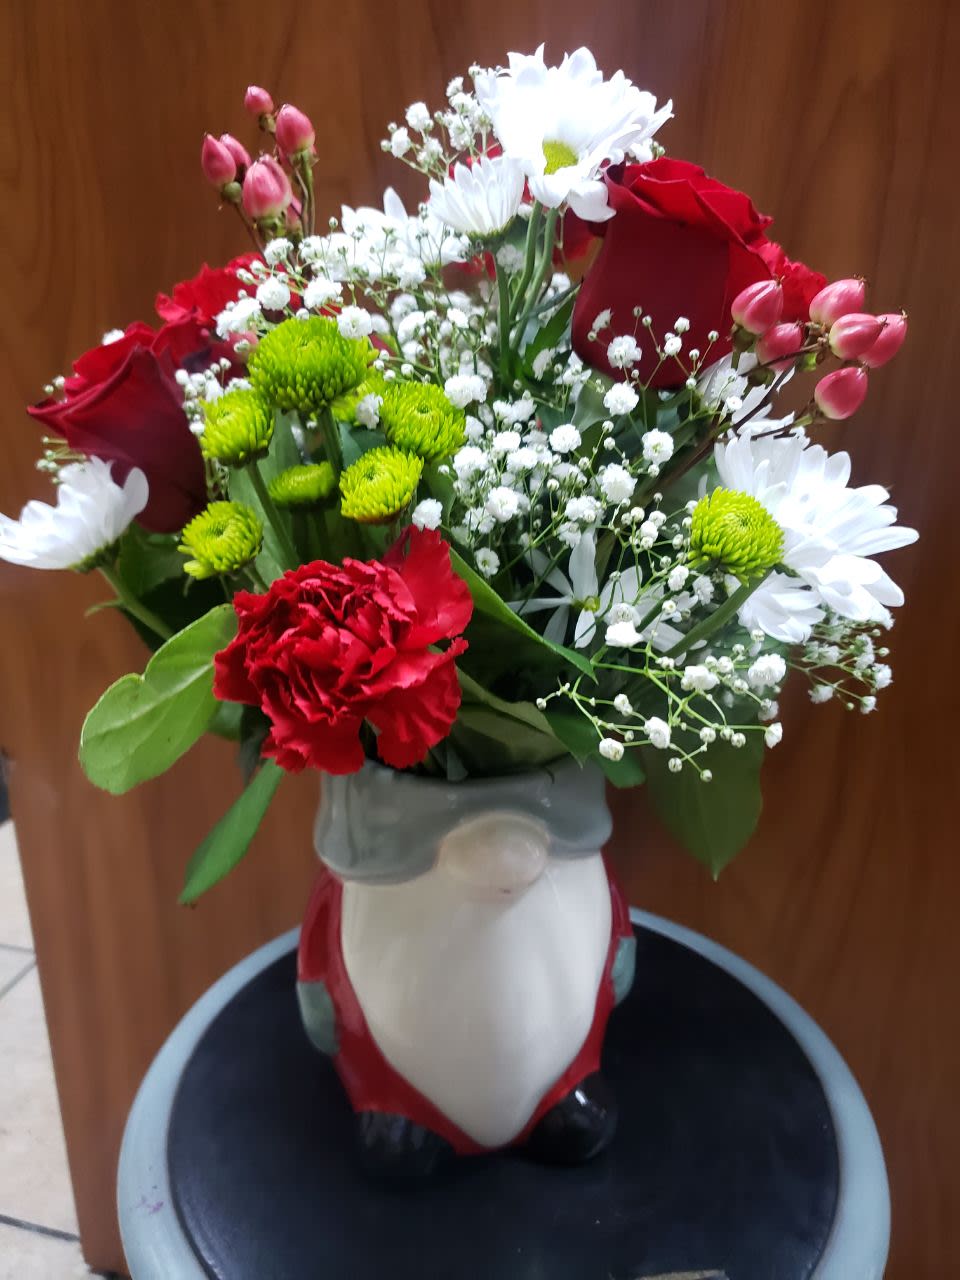 4 white daisies, 2 red roses,3 greens button, 3 stem of red